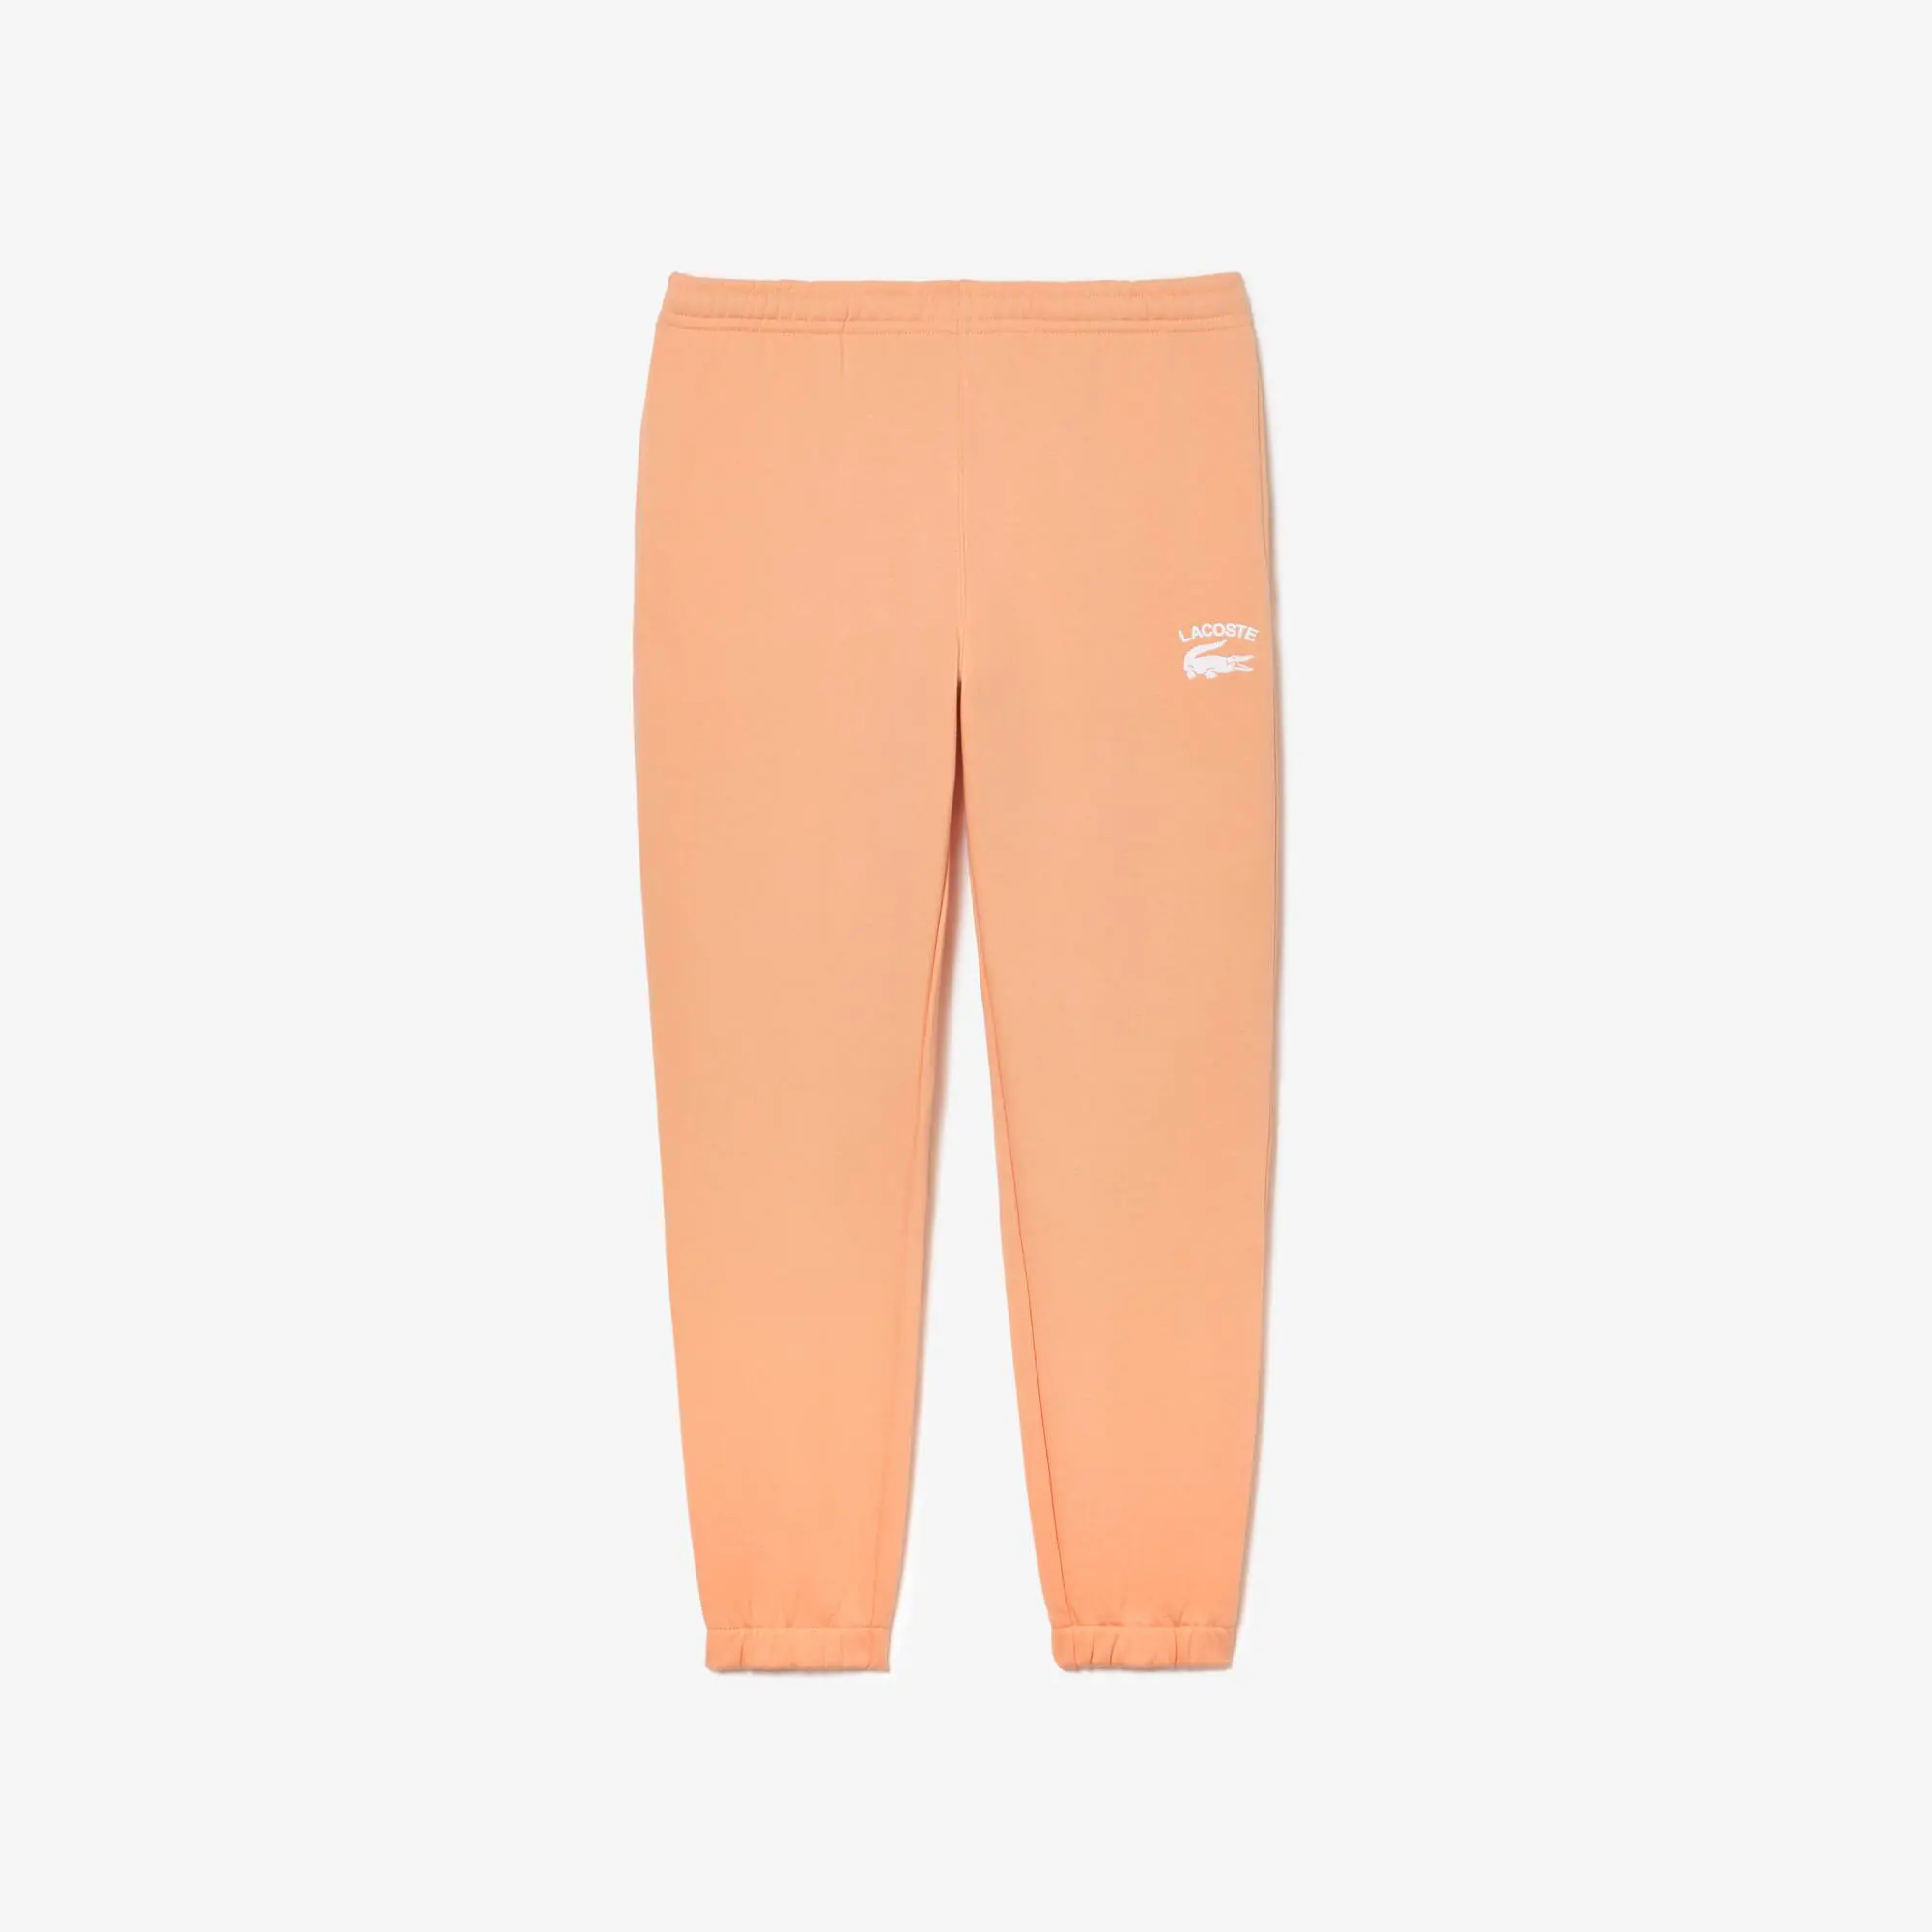 Lacoste Men's Lacoste Tapered Fit Trackpants. 2